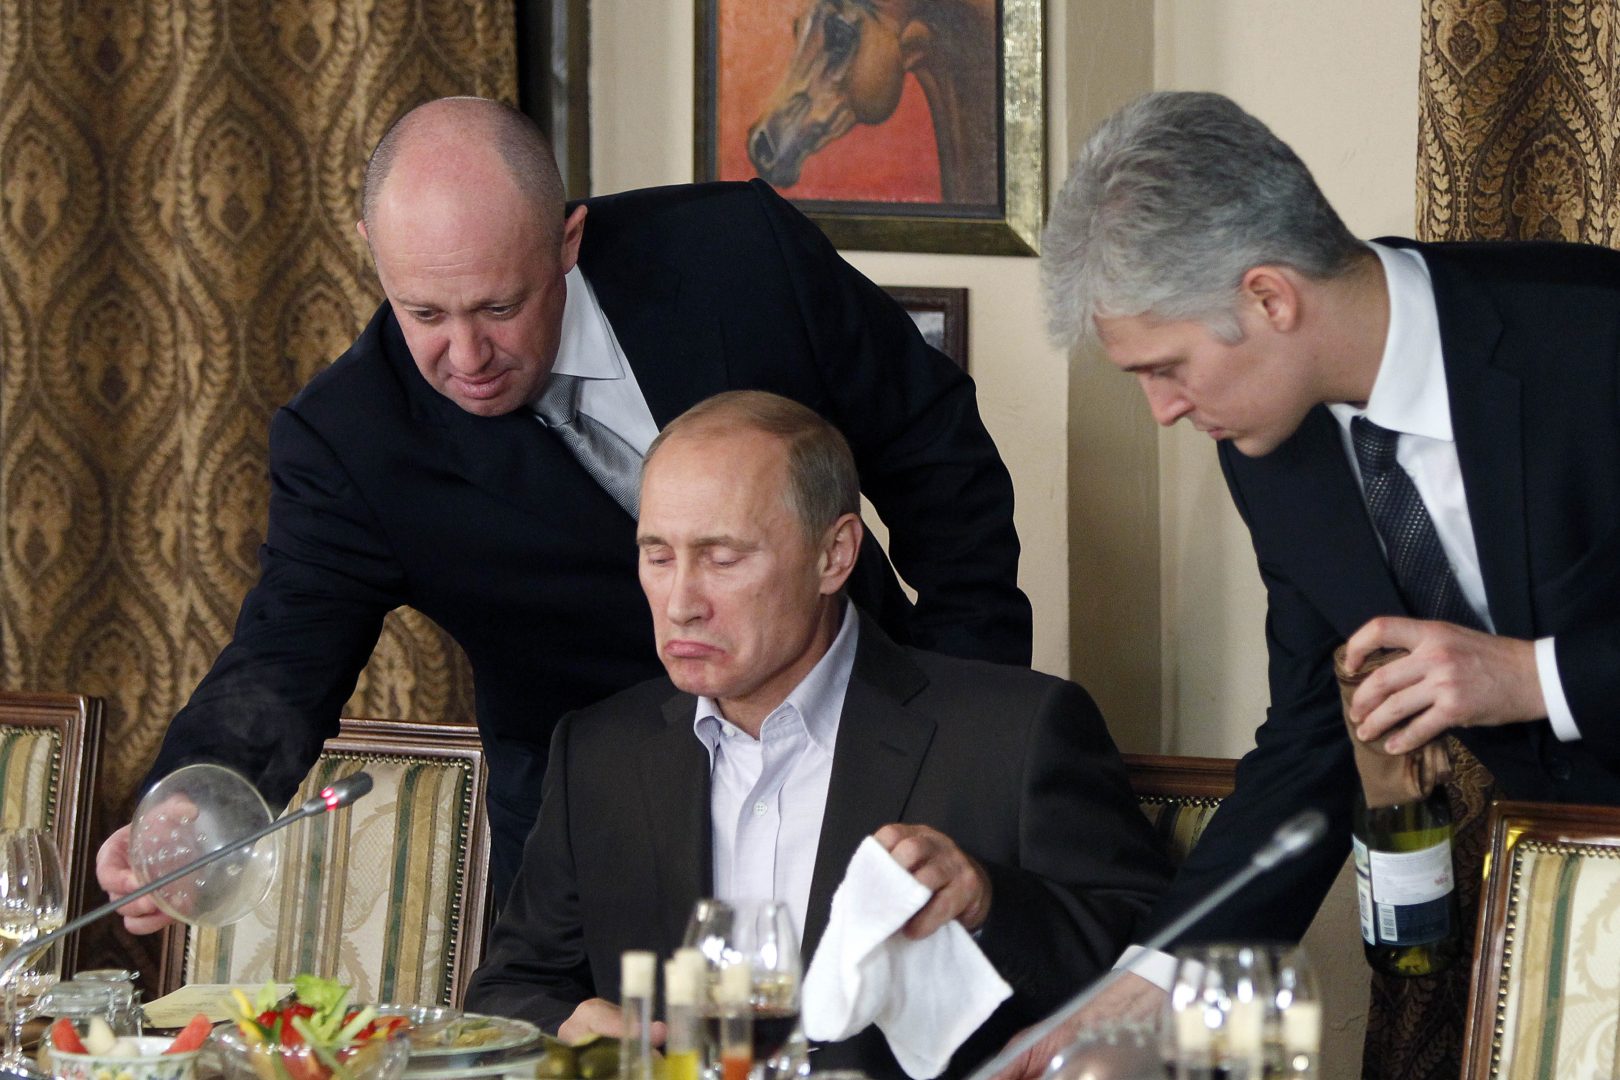 FILE - In this Friday, Nov. 11, 2011, file photo, businessman Yevgeny Prigozhin, left, serves food to Russian Prime Minister Vladimir Putin, center, during dinner at Prigozhin's restaurant outside Moscow, Russia. The U.S. sought to punish Russia on Monday, Sept. 30, 2019, for interfering with the November 2018 election by placing the yacht and private planes of a Russian financier, Yevgeny Prigozhin, on an international sanctions list along with employees of the Internet Research Agency that he has funded to spread false information on social media.